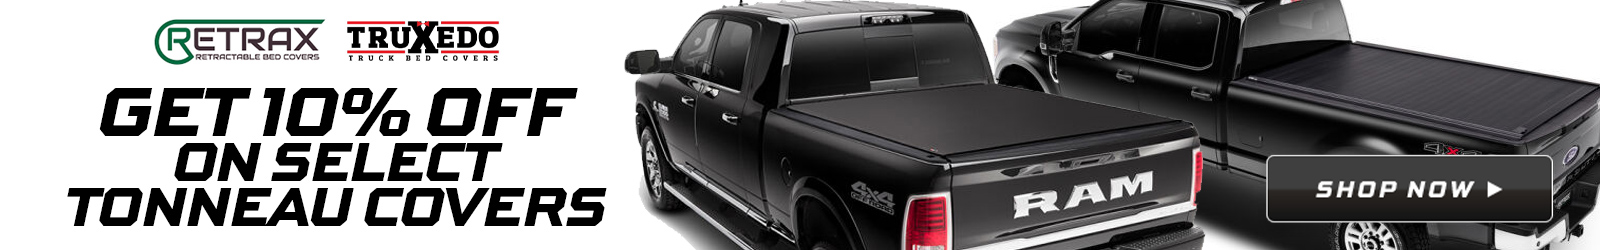 10% off on select Tonneau Covers